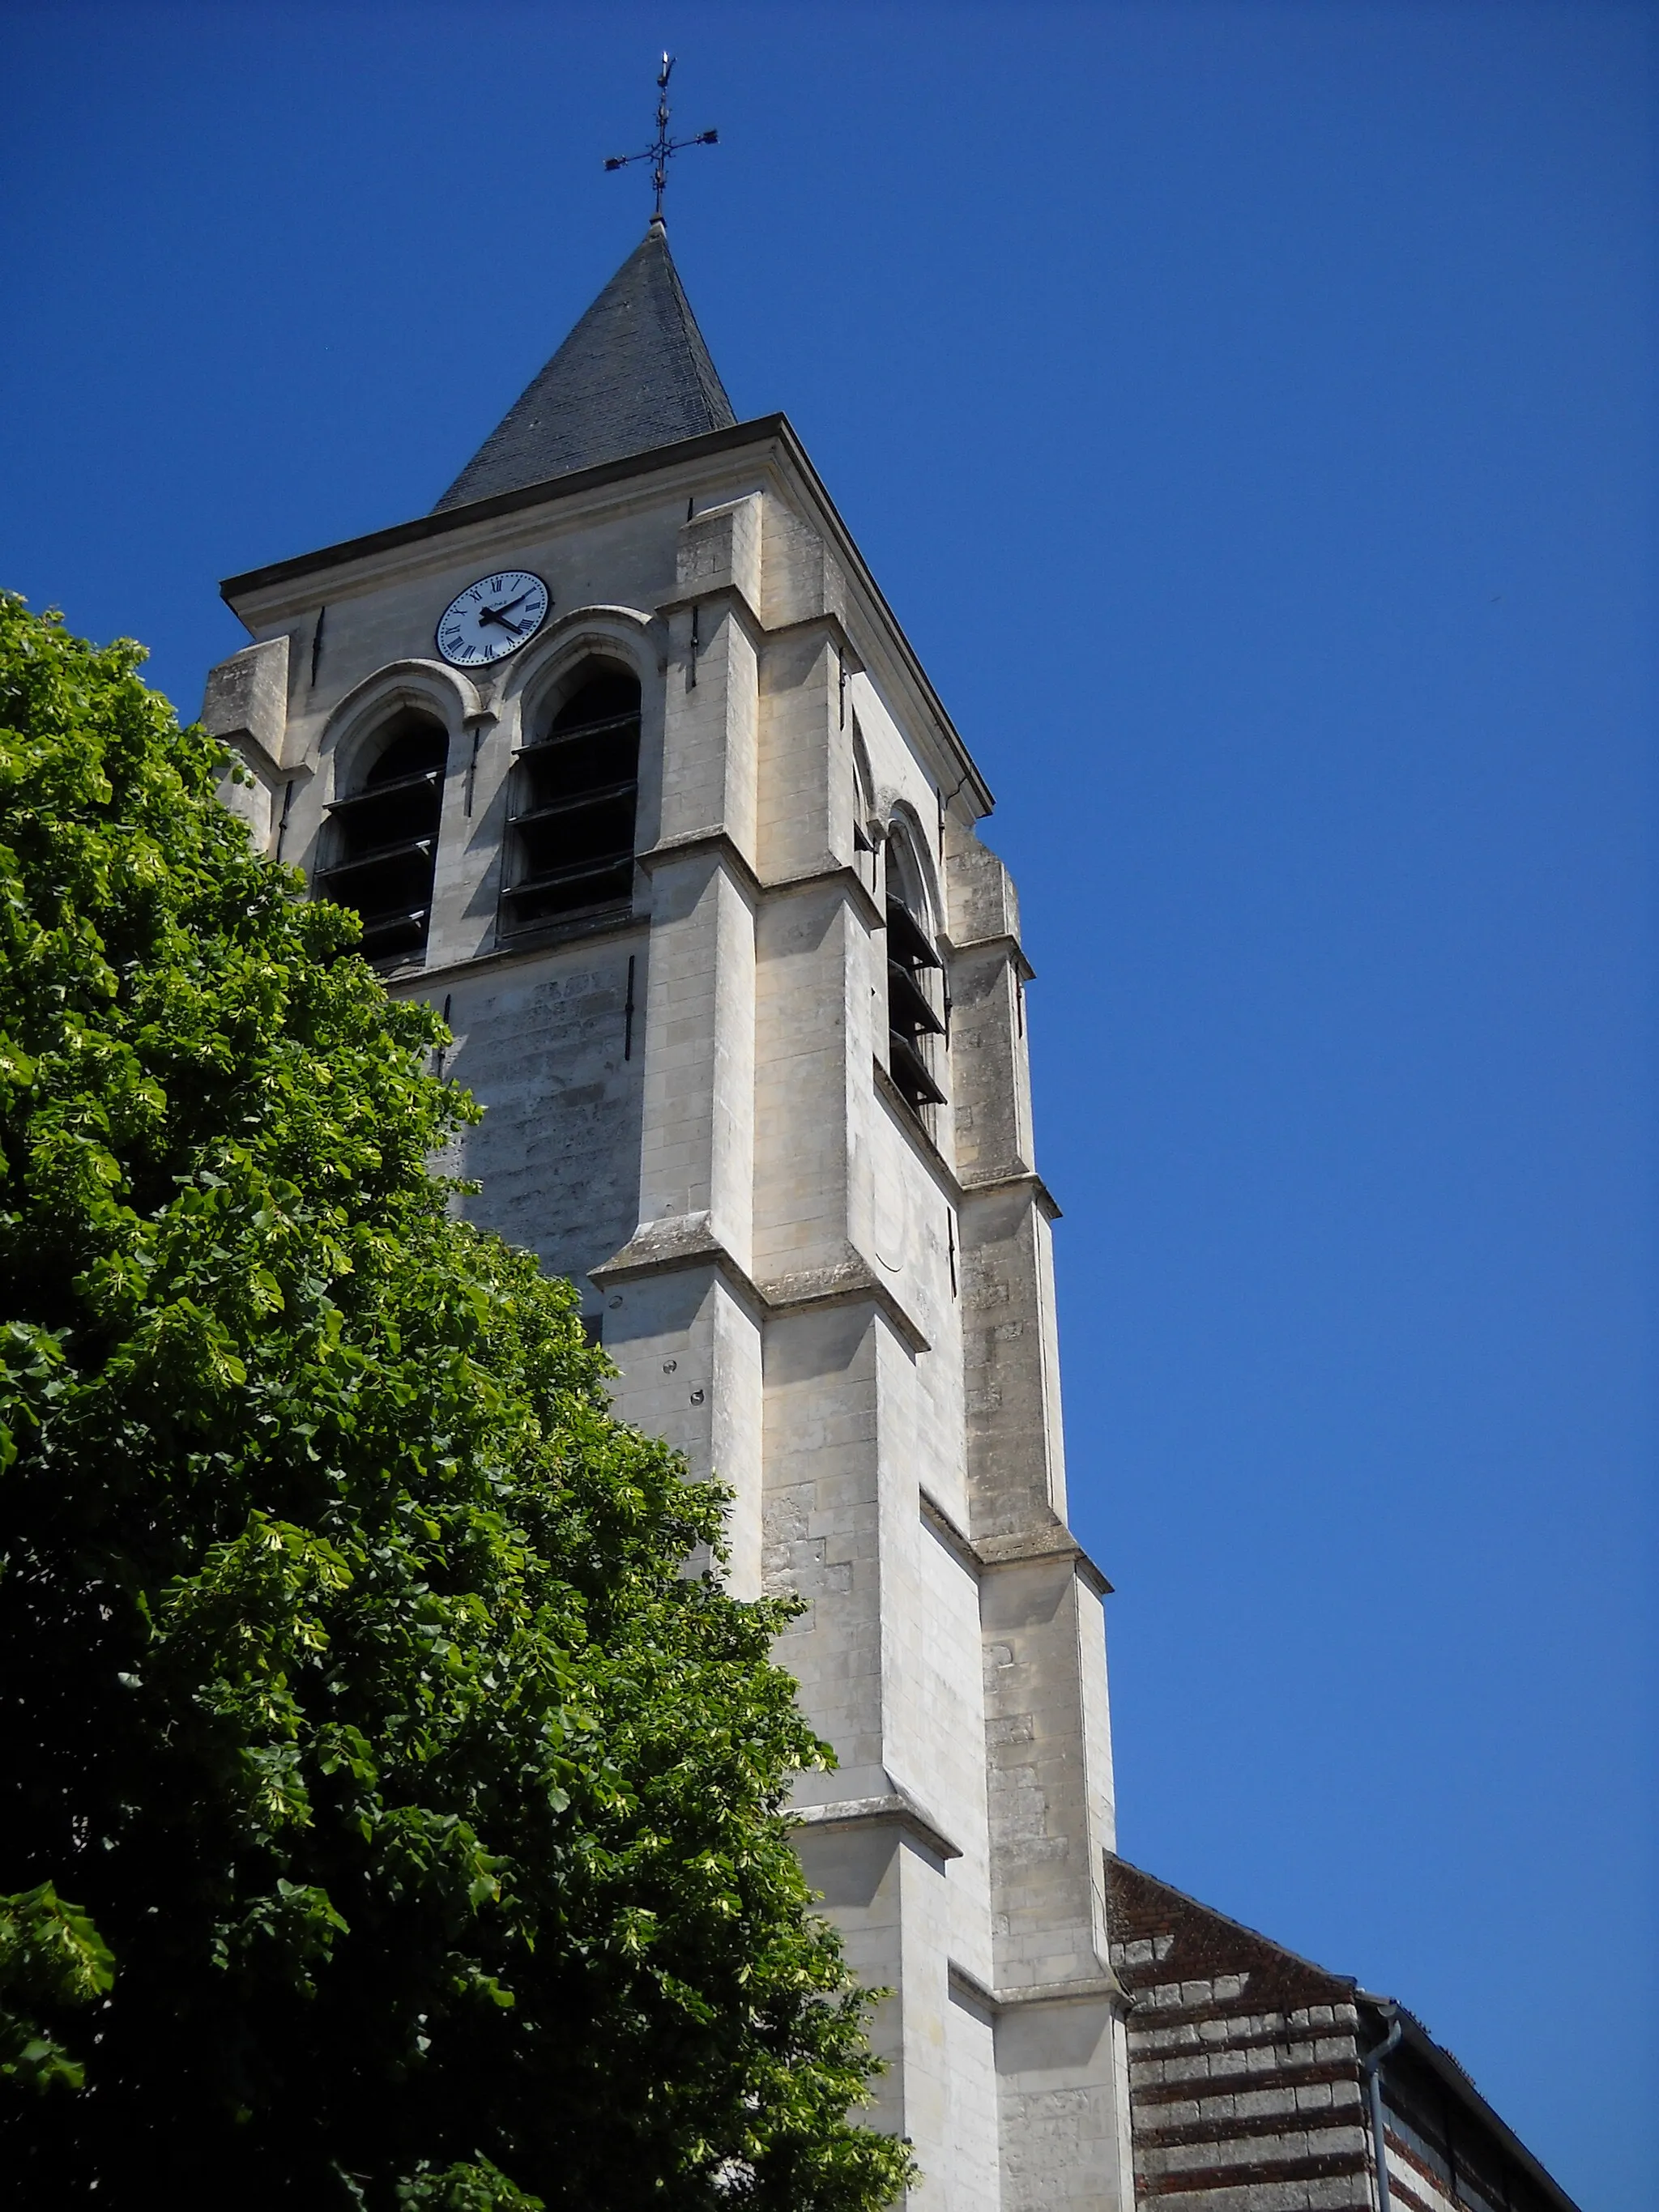 Photo showing: The church of Camphin-en-Carembault, Nord, France.